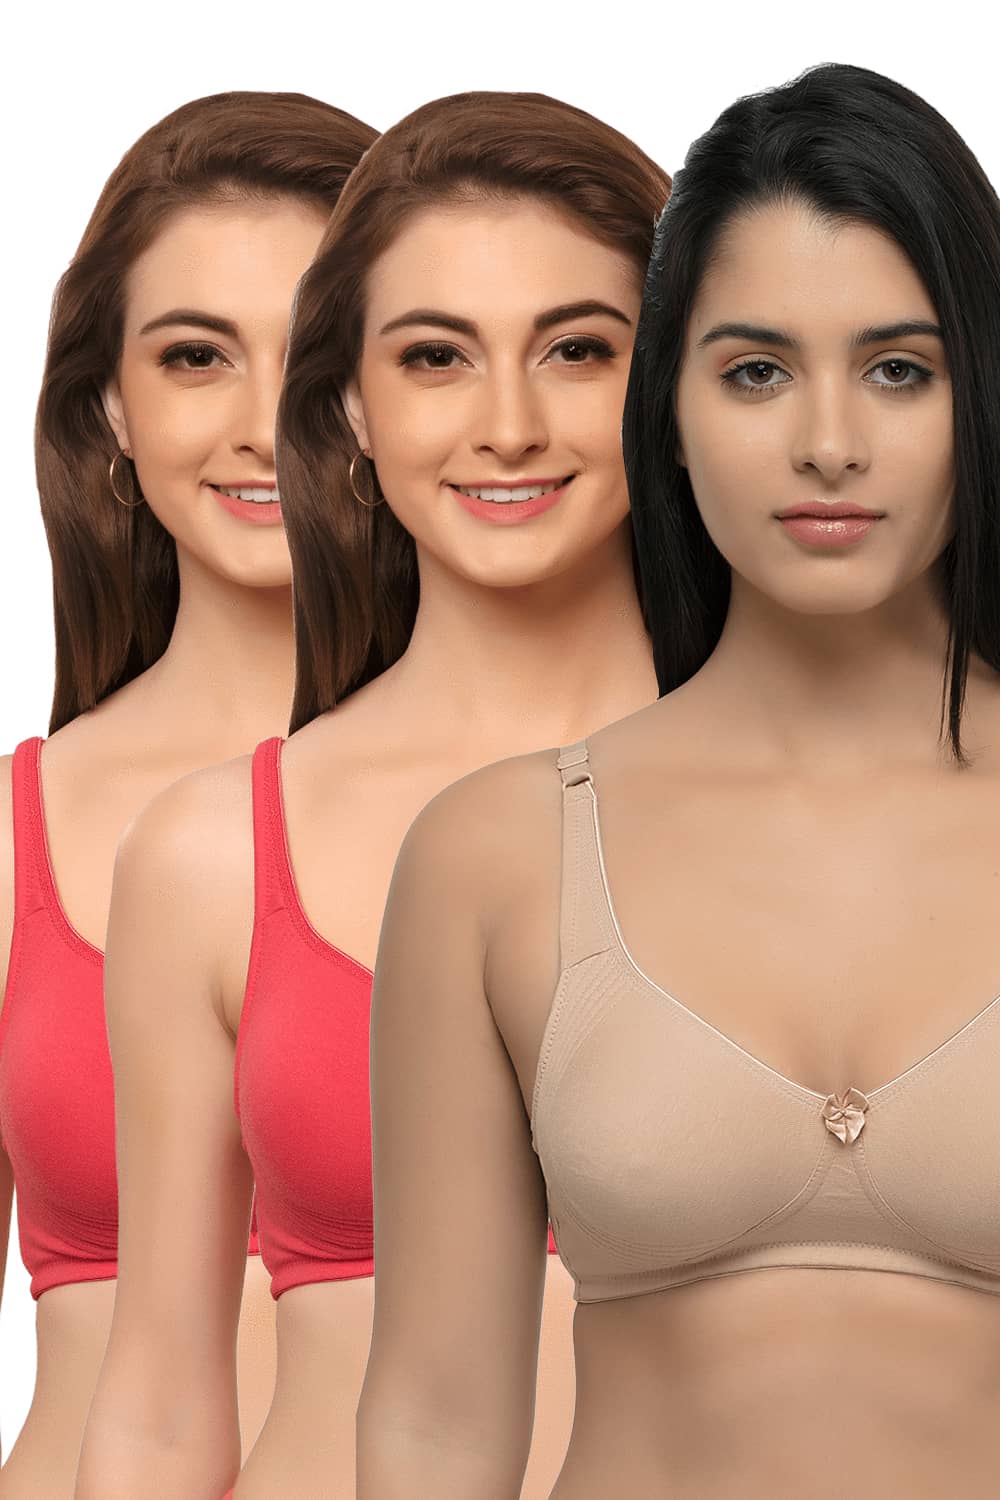 Buy Inner Sense Organic Cotton Antimicrobial Backless Non-Padded Seamless  bra-Multi-Color online